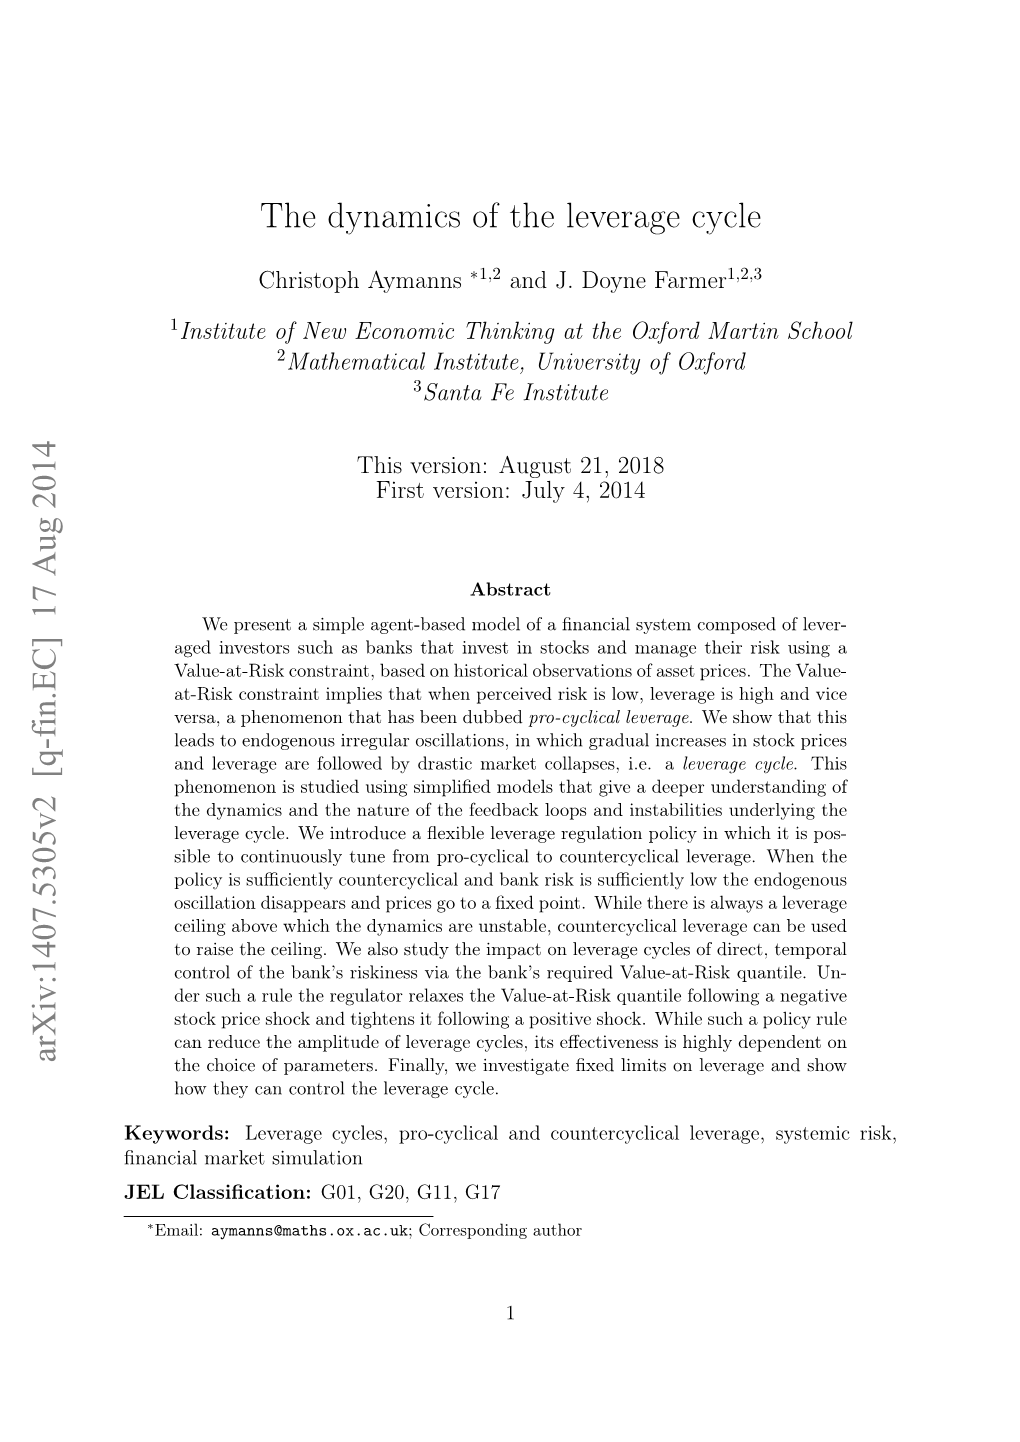 The Dynamics of the Leverage Cycle Arxiv:1407.5305V2 [Q-Fin.EC] 17